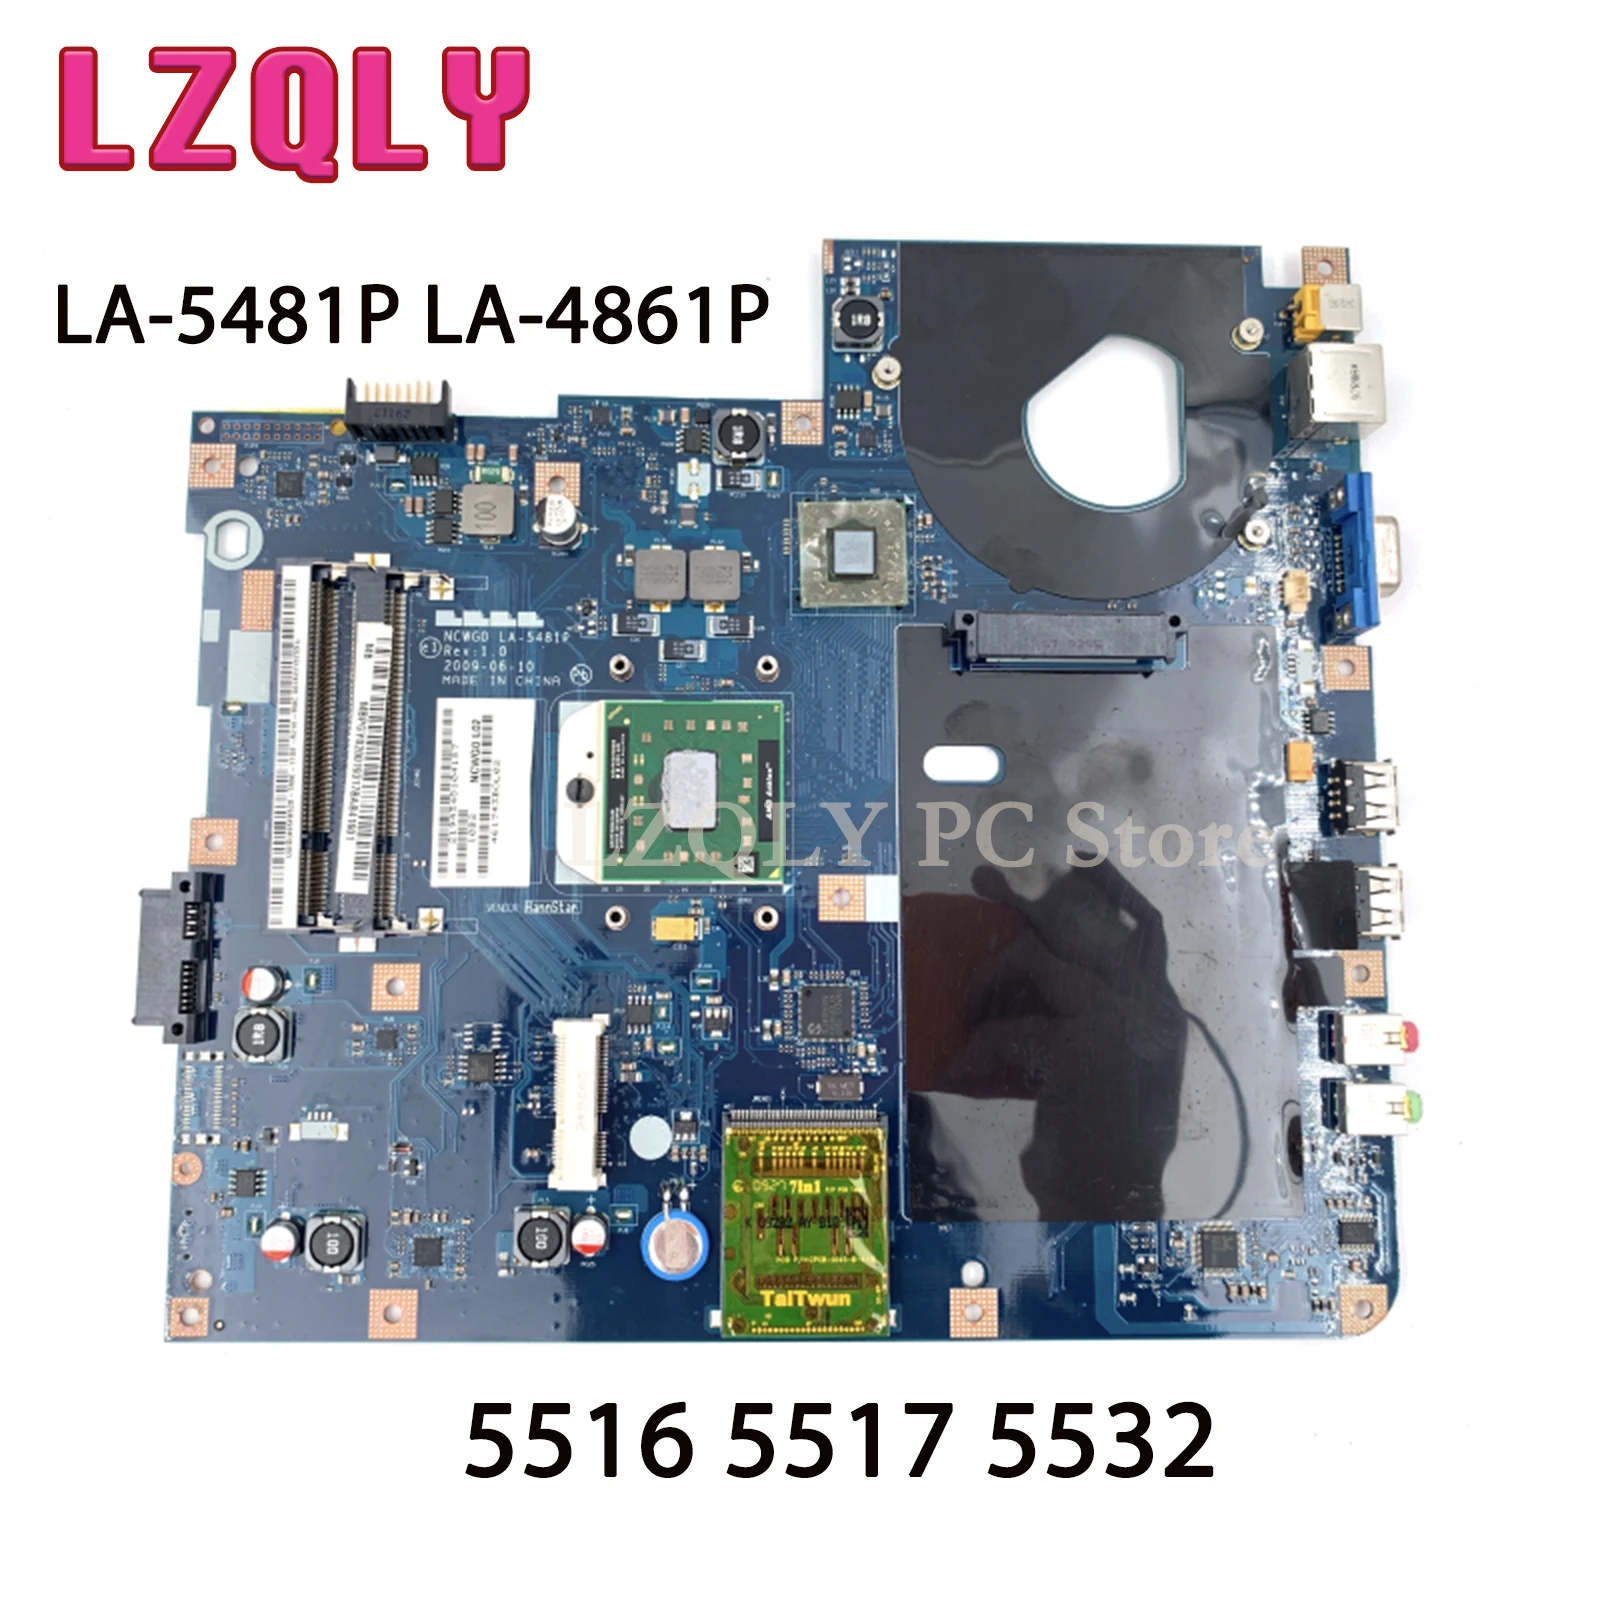 

LQZLY For Acer Aspire 5516 5517 5532 LA-5481P LA-4861P MBPGY02001 MB.PGY02.001 Laptop Motherboard DDR2 Free CPU MAIN BAORD